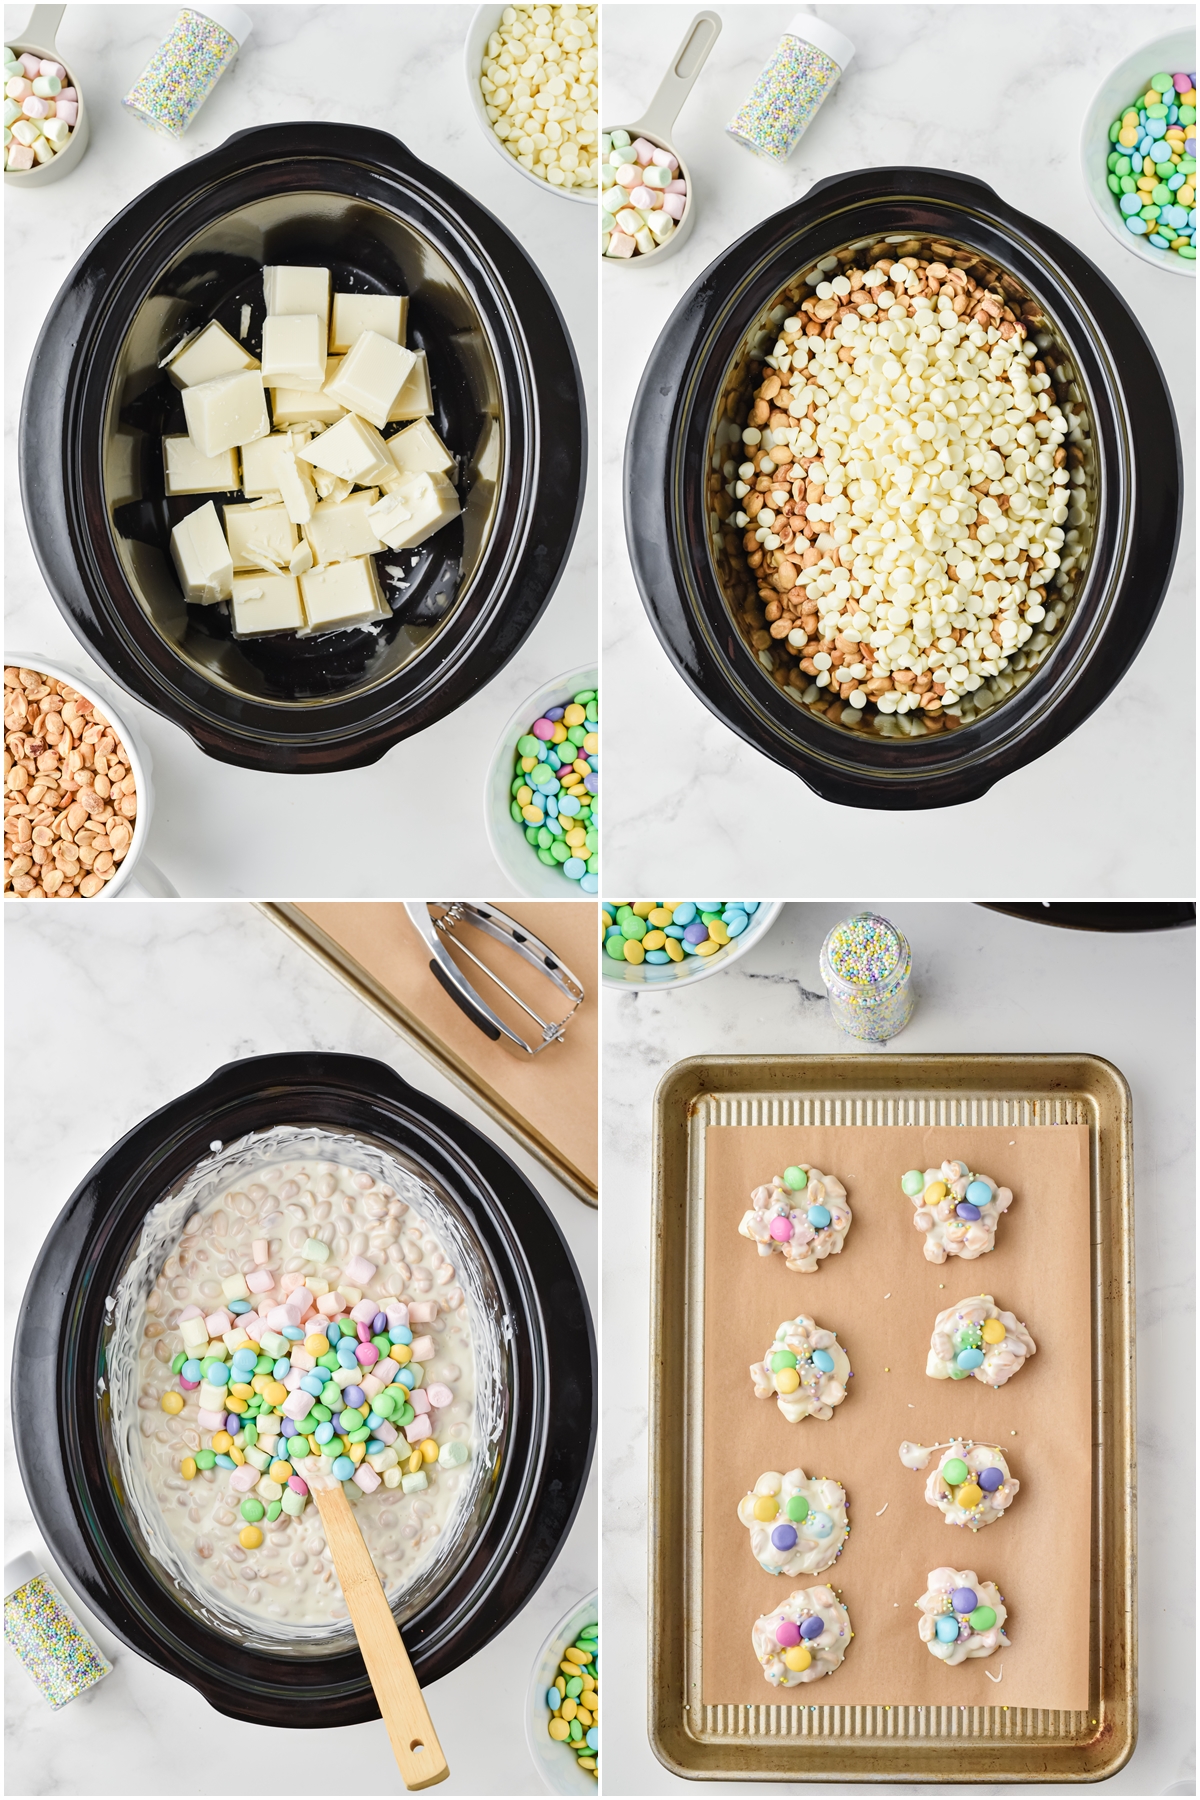 Process of preparing Crockpot Easter Candy. Starting of with mixing and melting the ingredients and forming the candies. Then putting it on a tray.